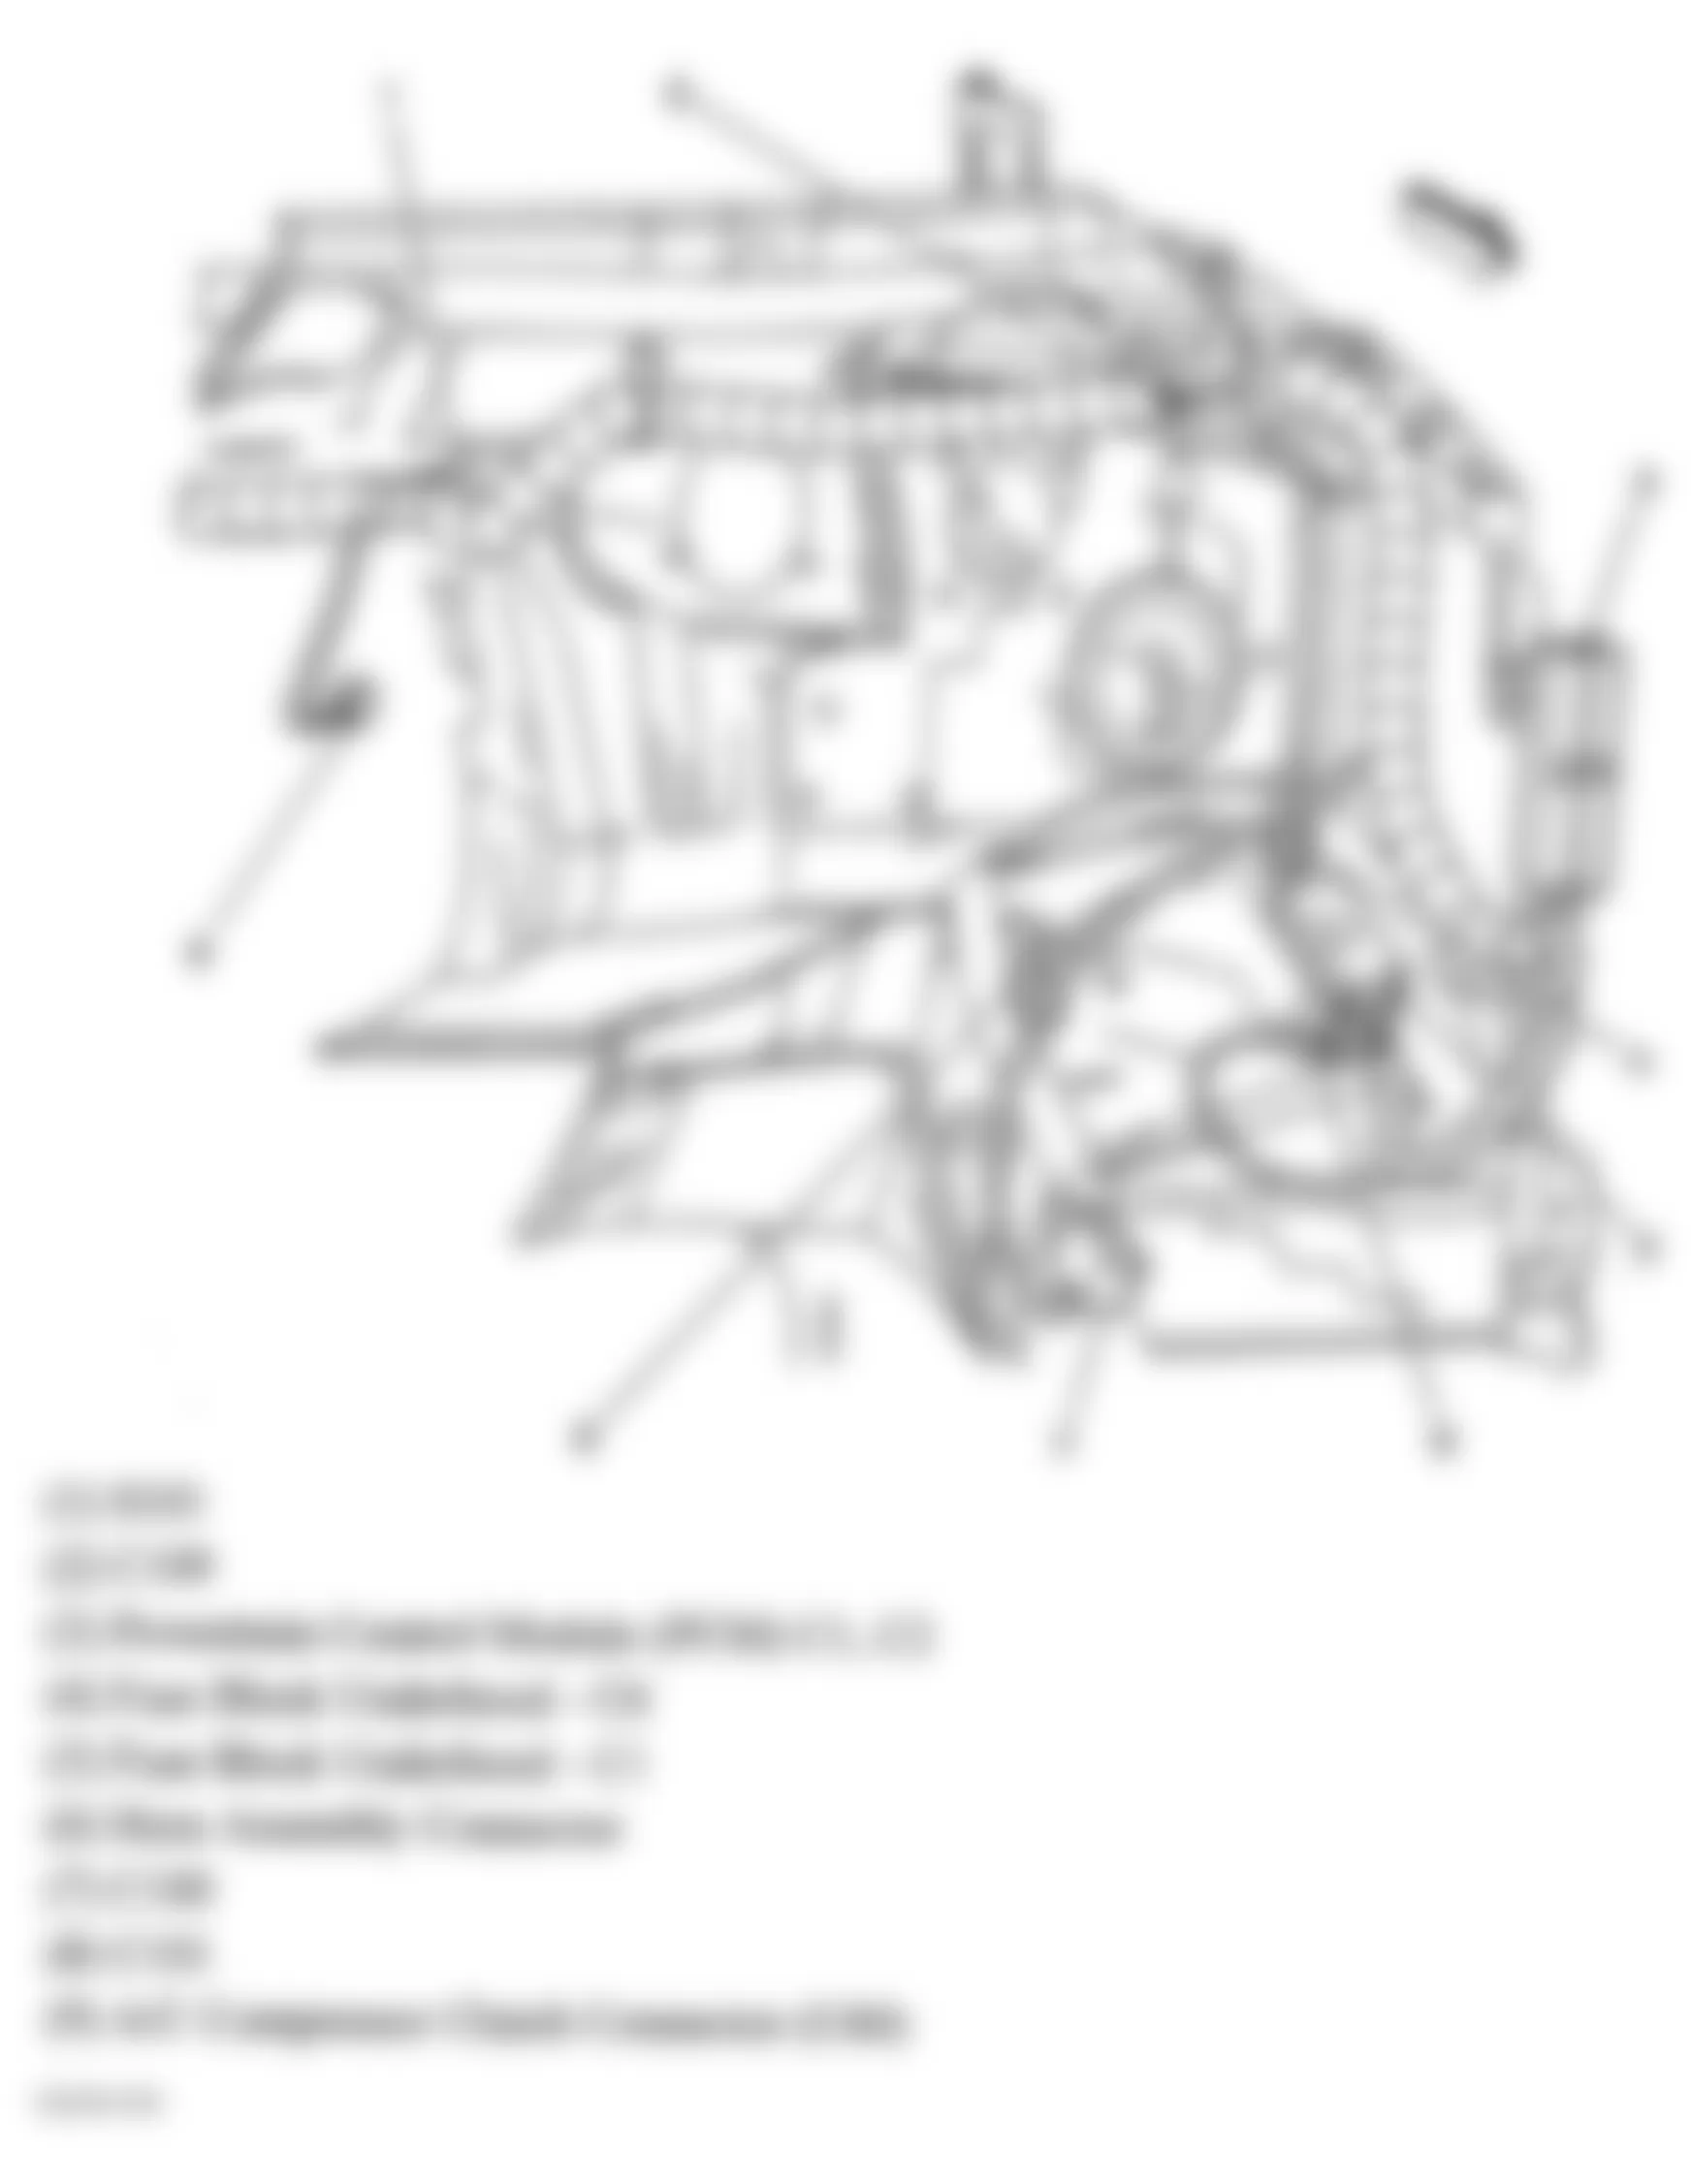 GMC Savana H1500 2006 - Component Locations -  Left Rear Of Engine Compartment